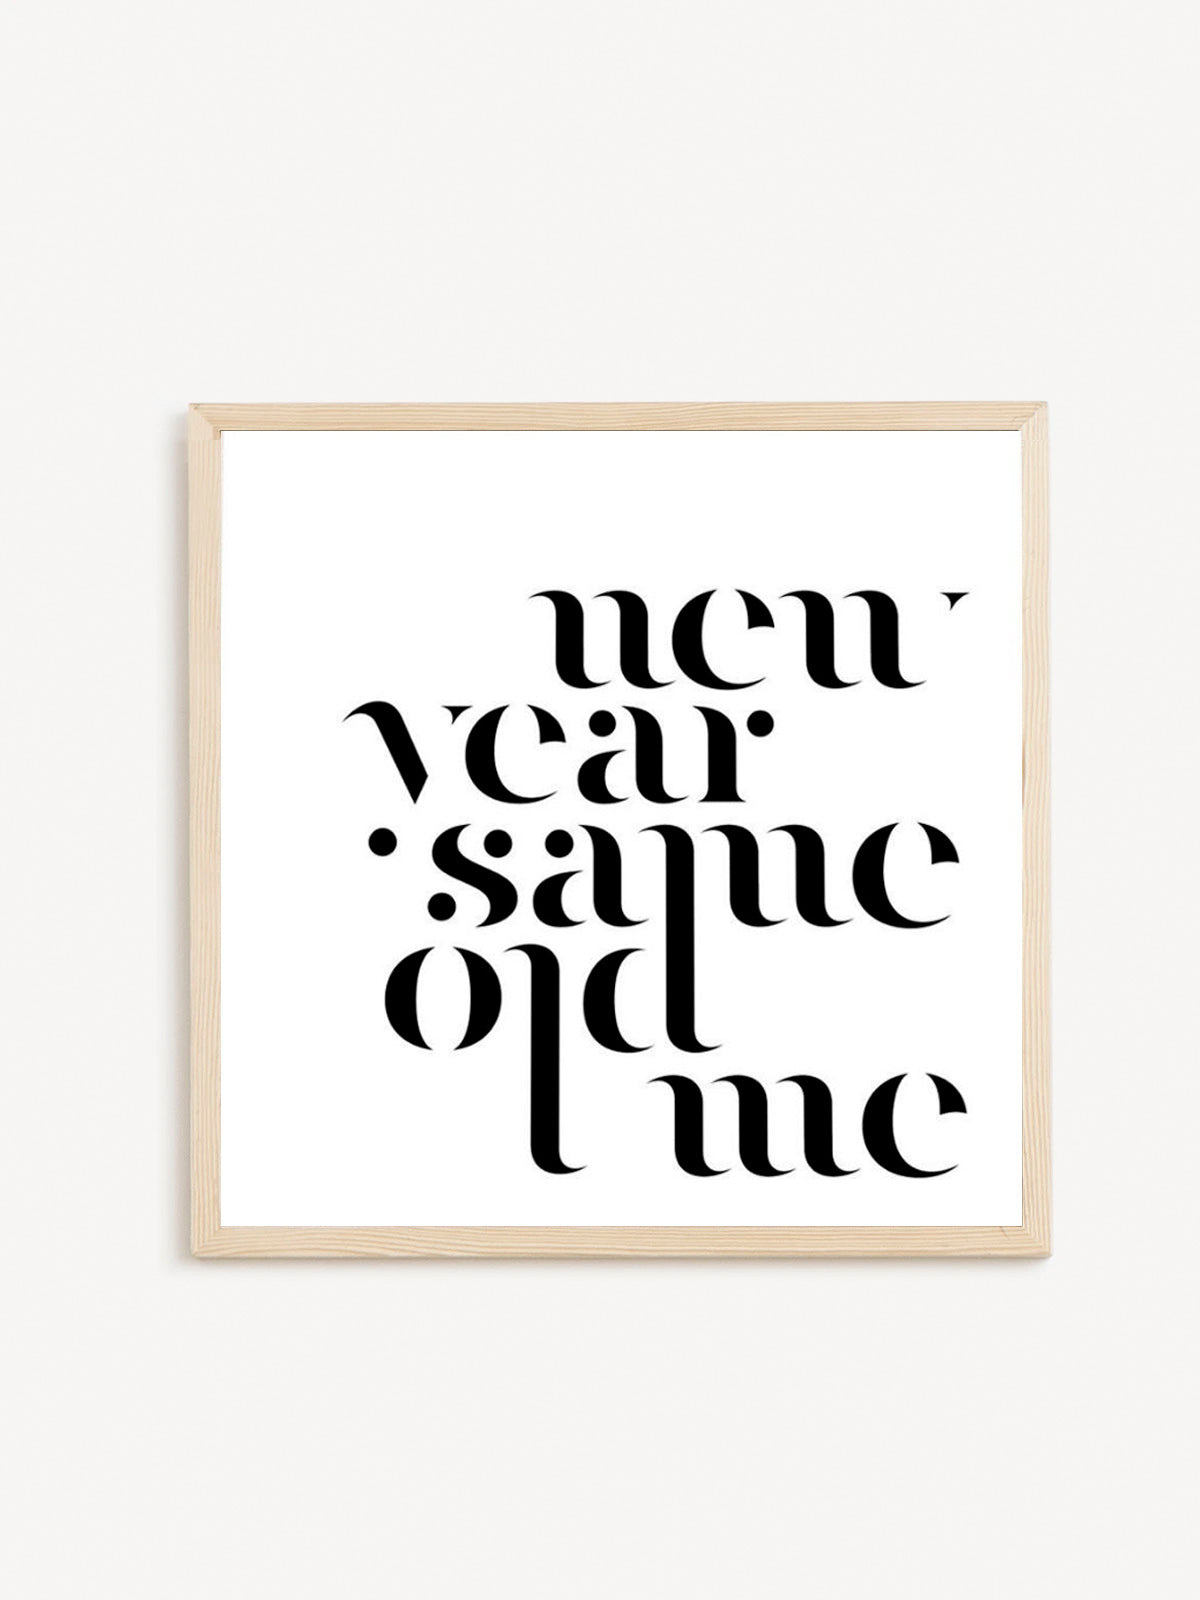 NEW YEAR SAME OLD ME graphic - Marcell Puskás